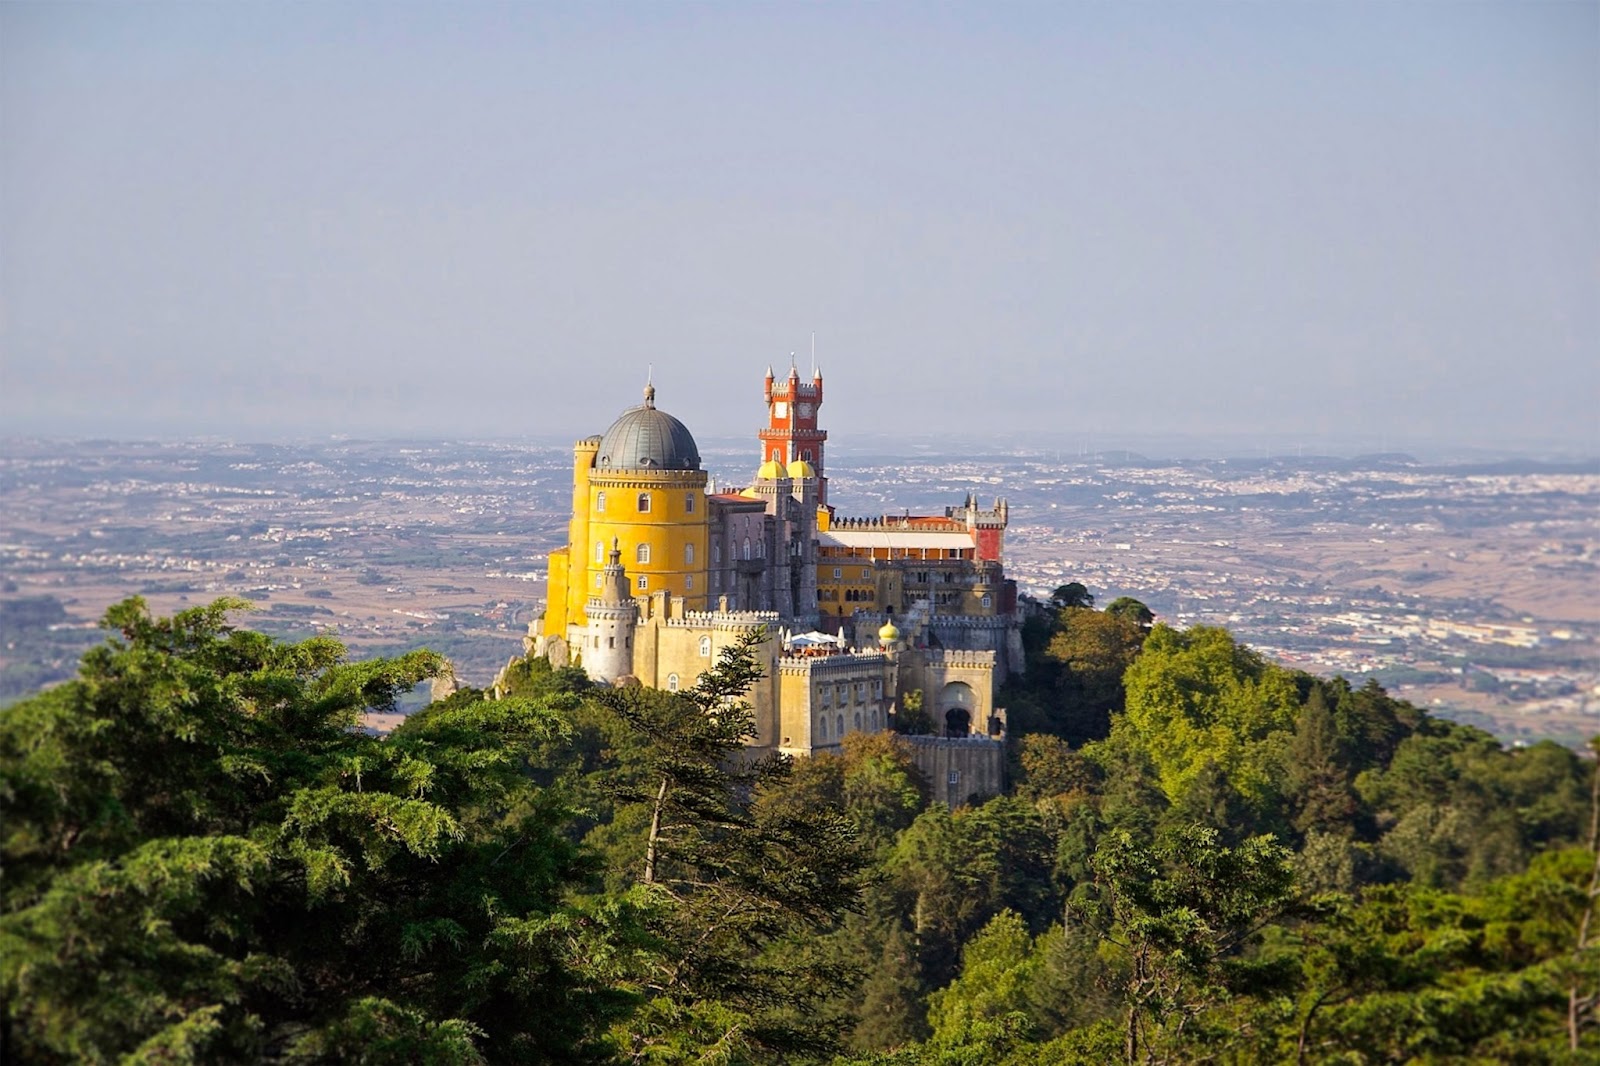 A fairytale of vibrant colors and architectural marvels atop Sintra's hills.
